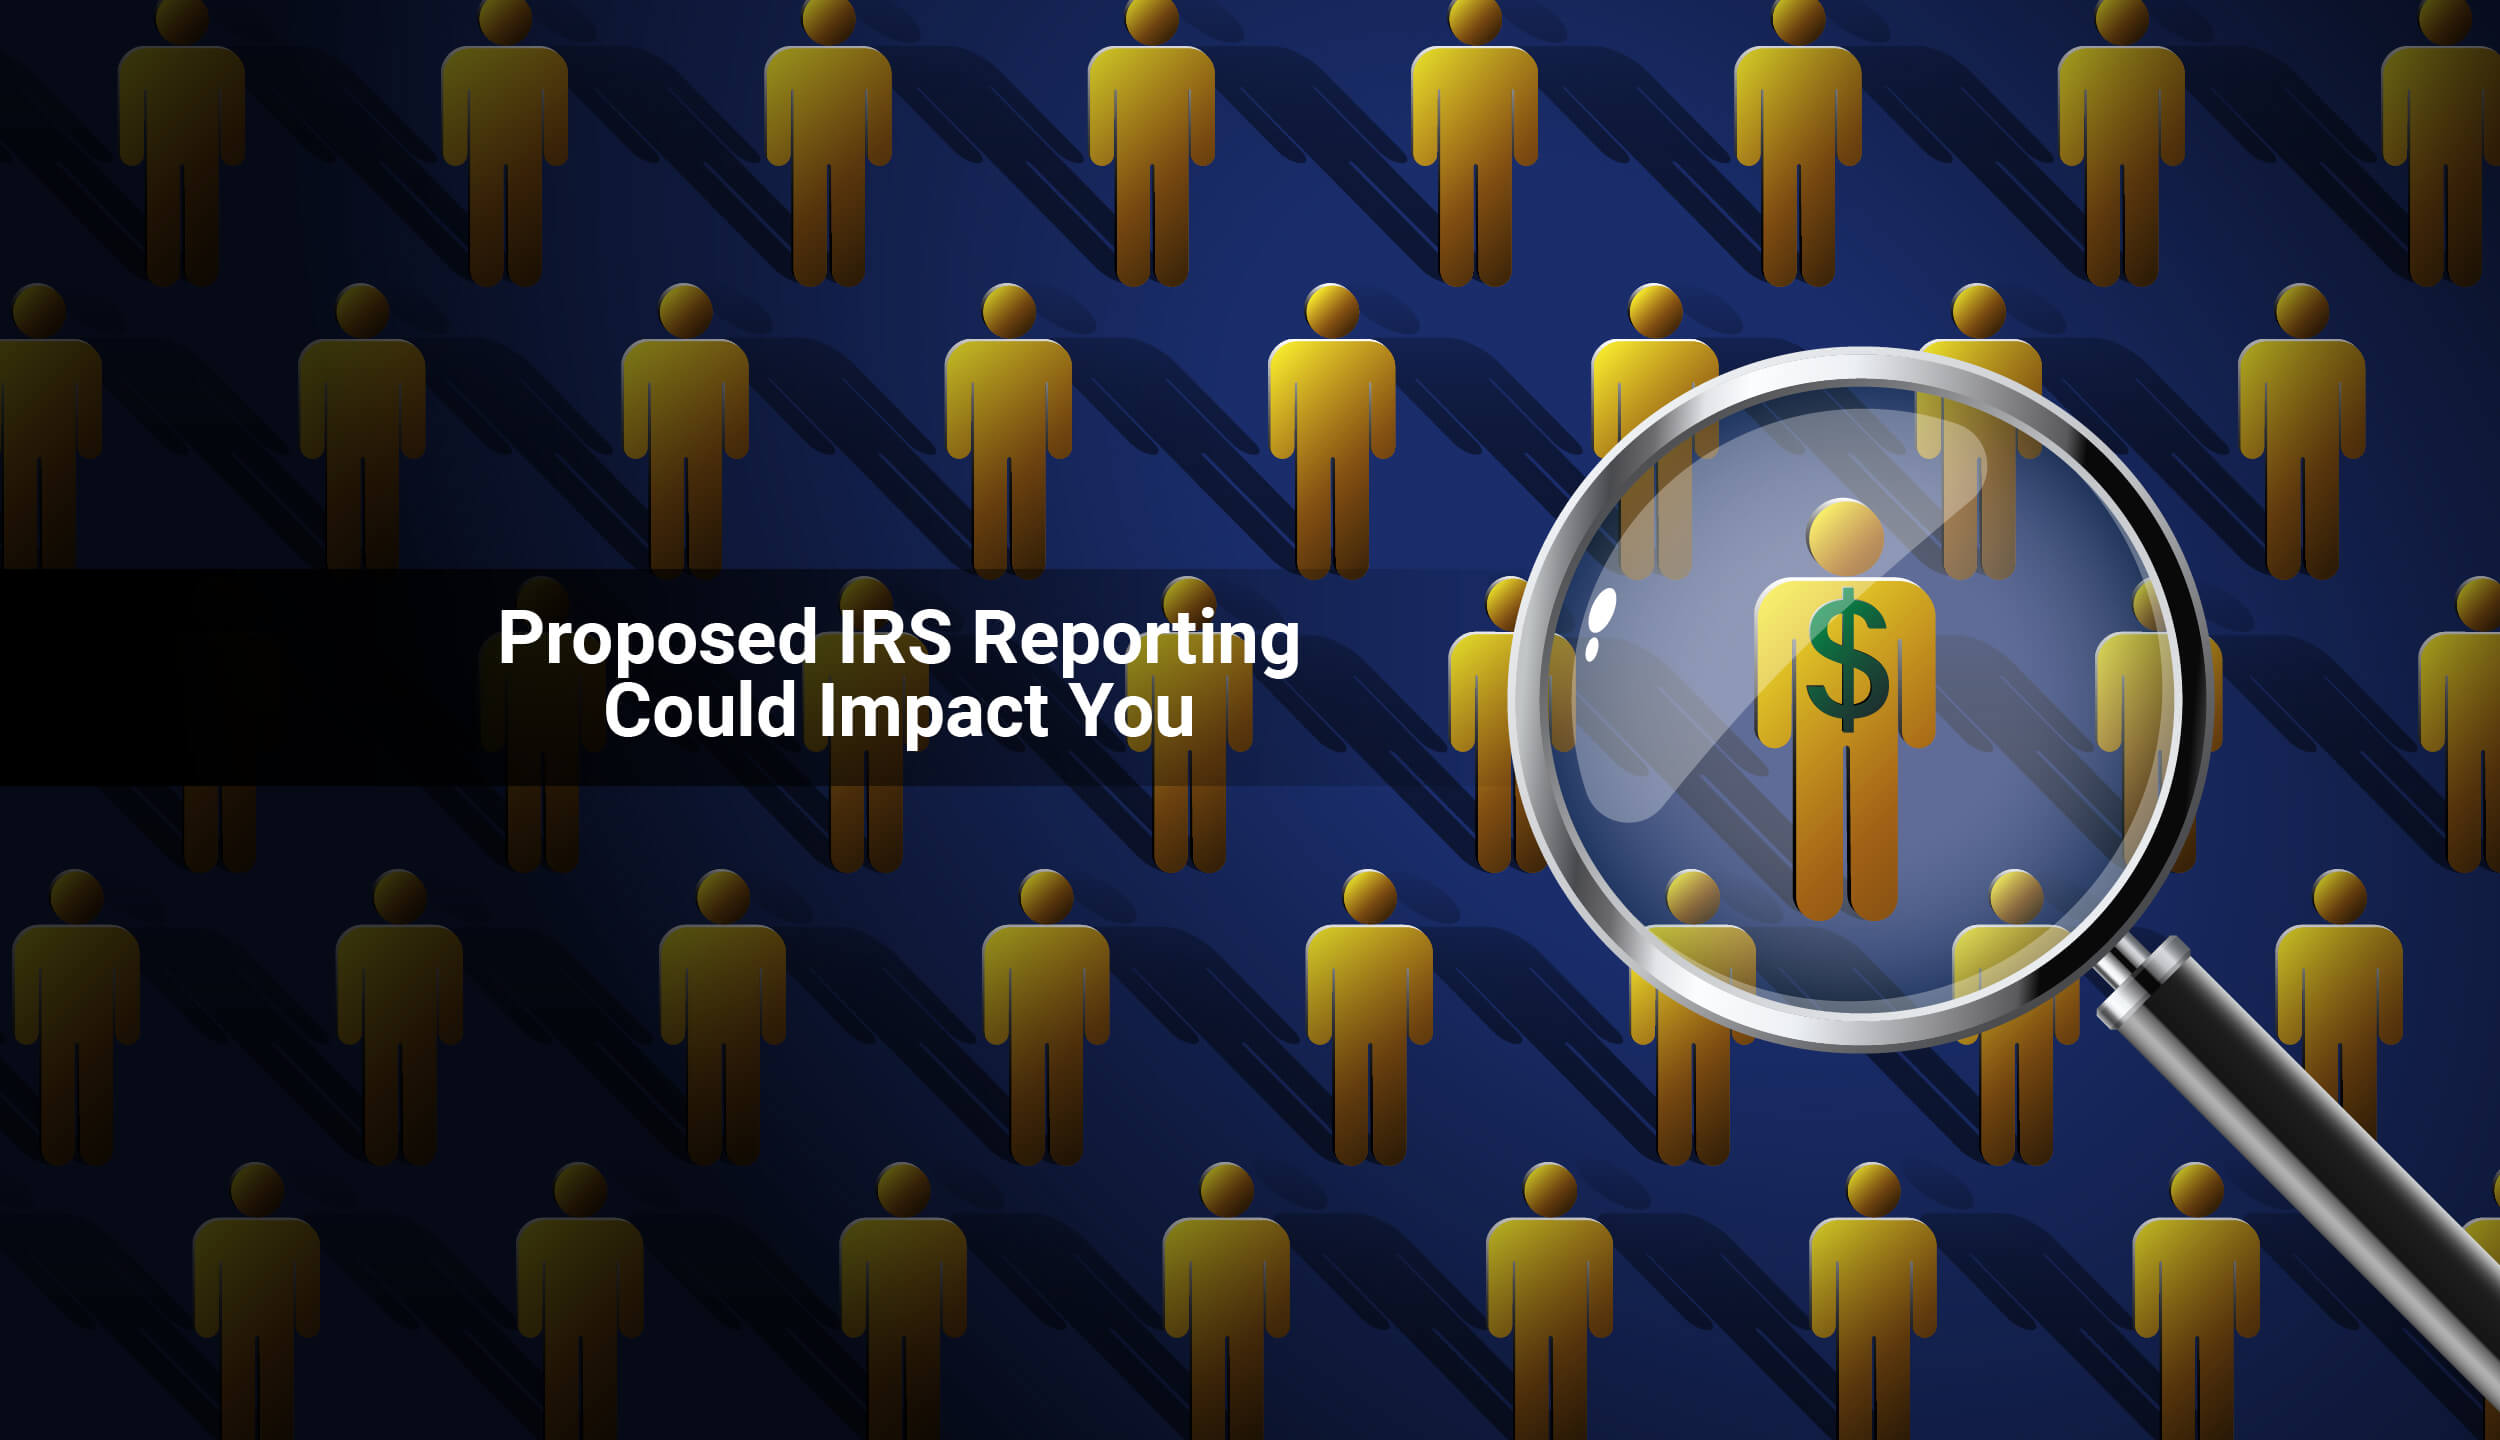 Proposed IRS Reporting Could Impact You